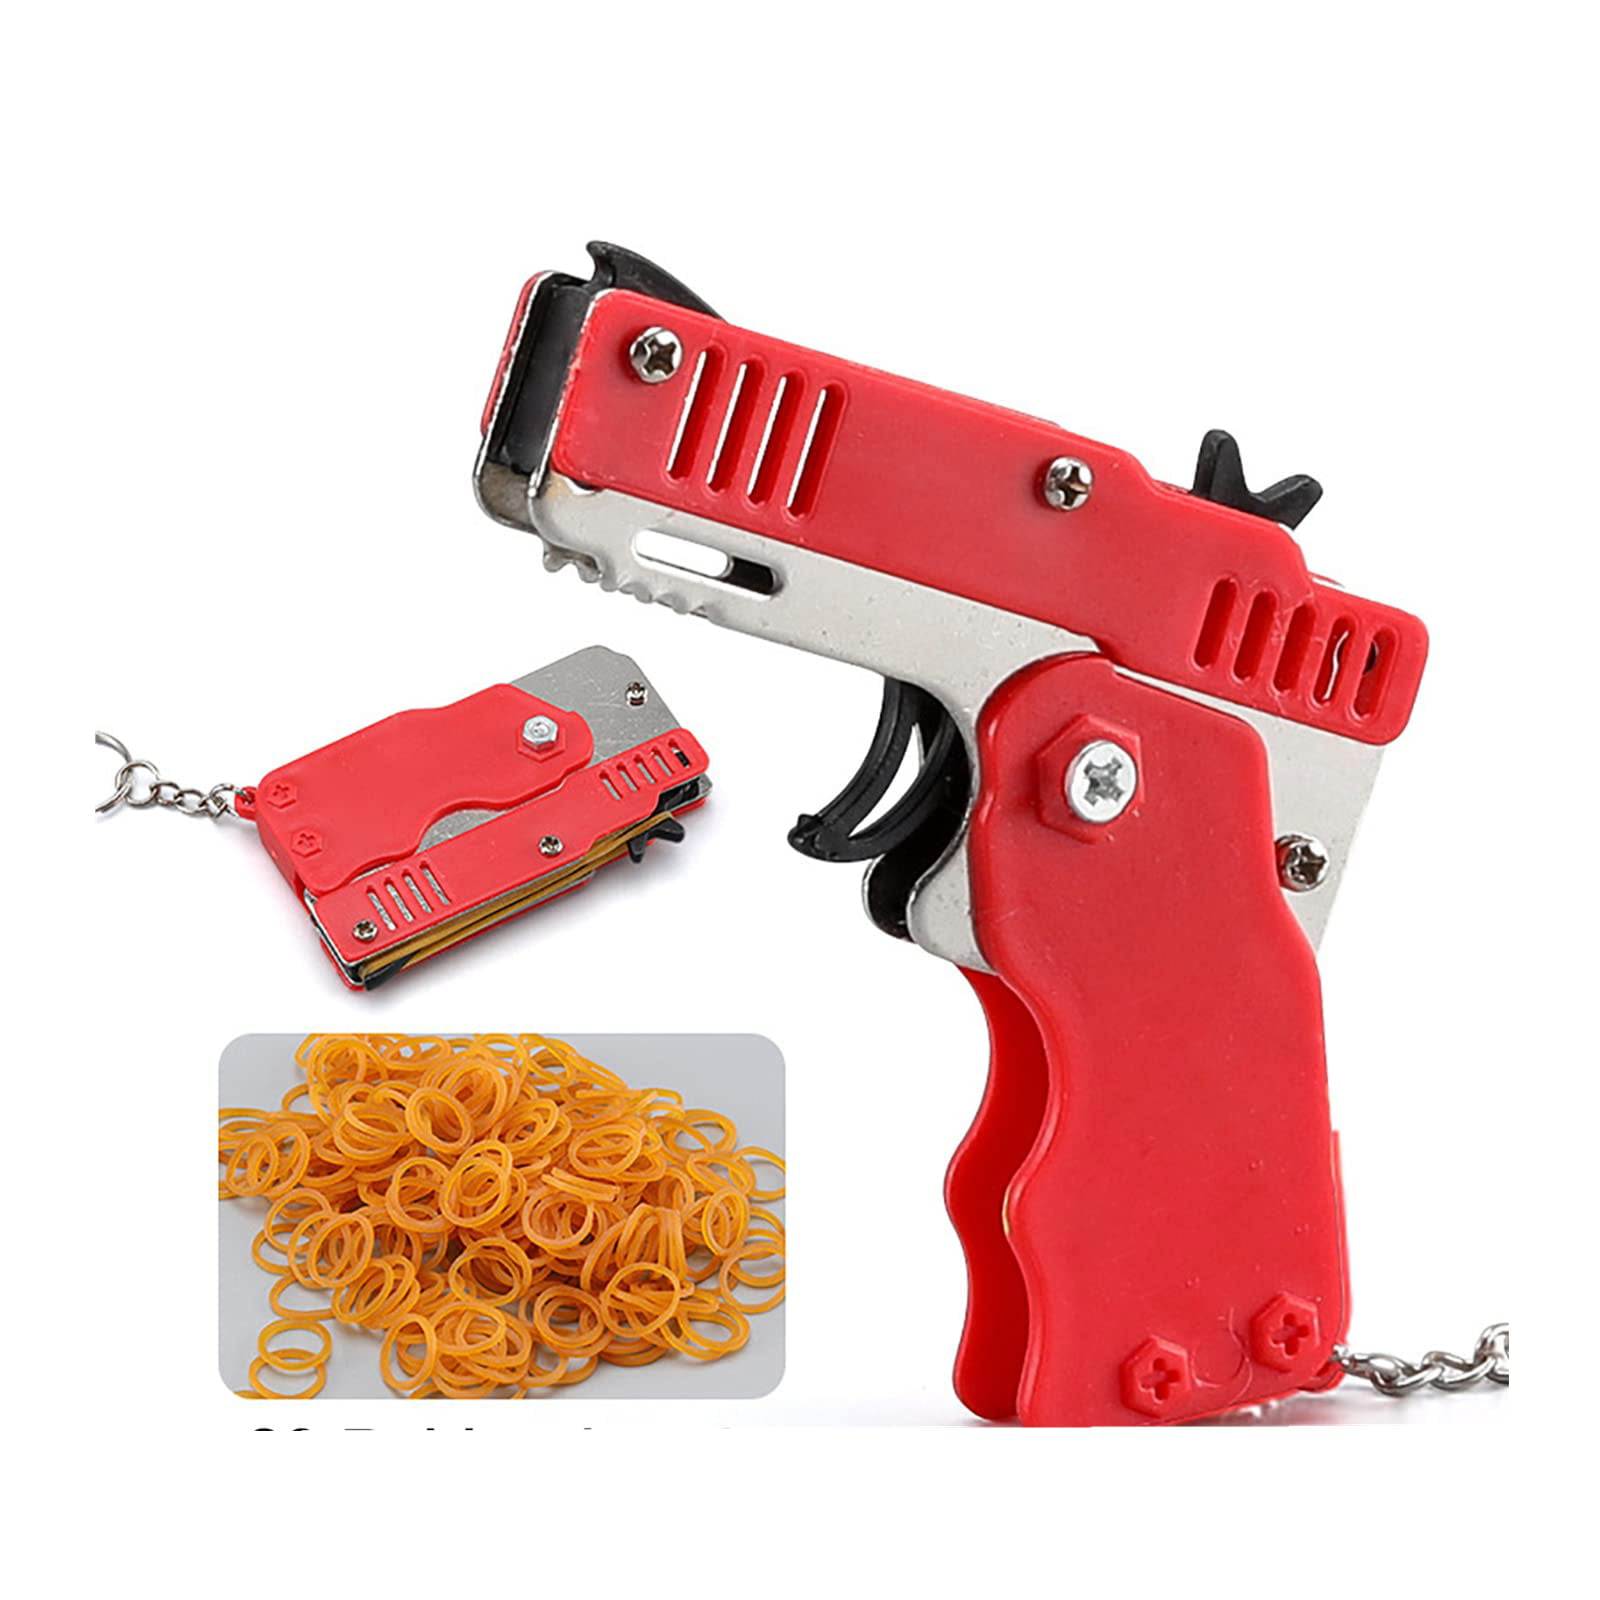 Rubber Band Gun Mini Metal Folding 6-Shot with Keychain and Rubber Band New 